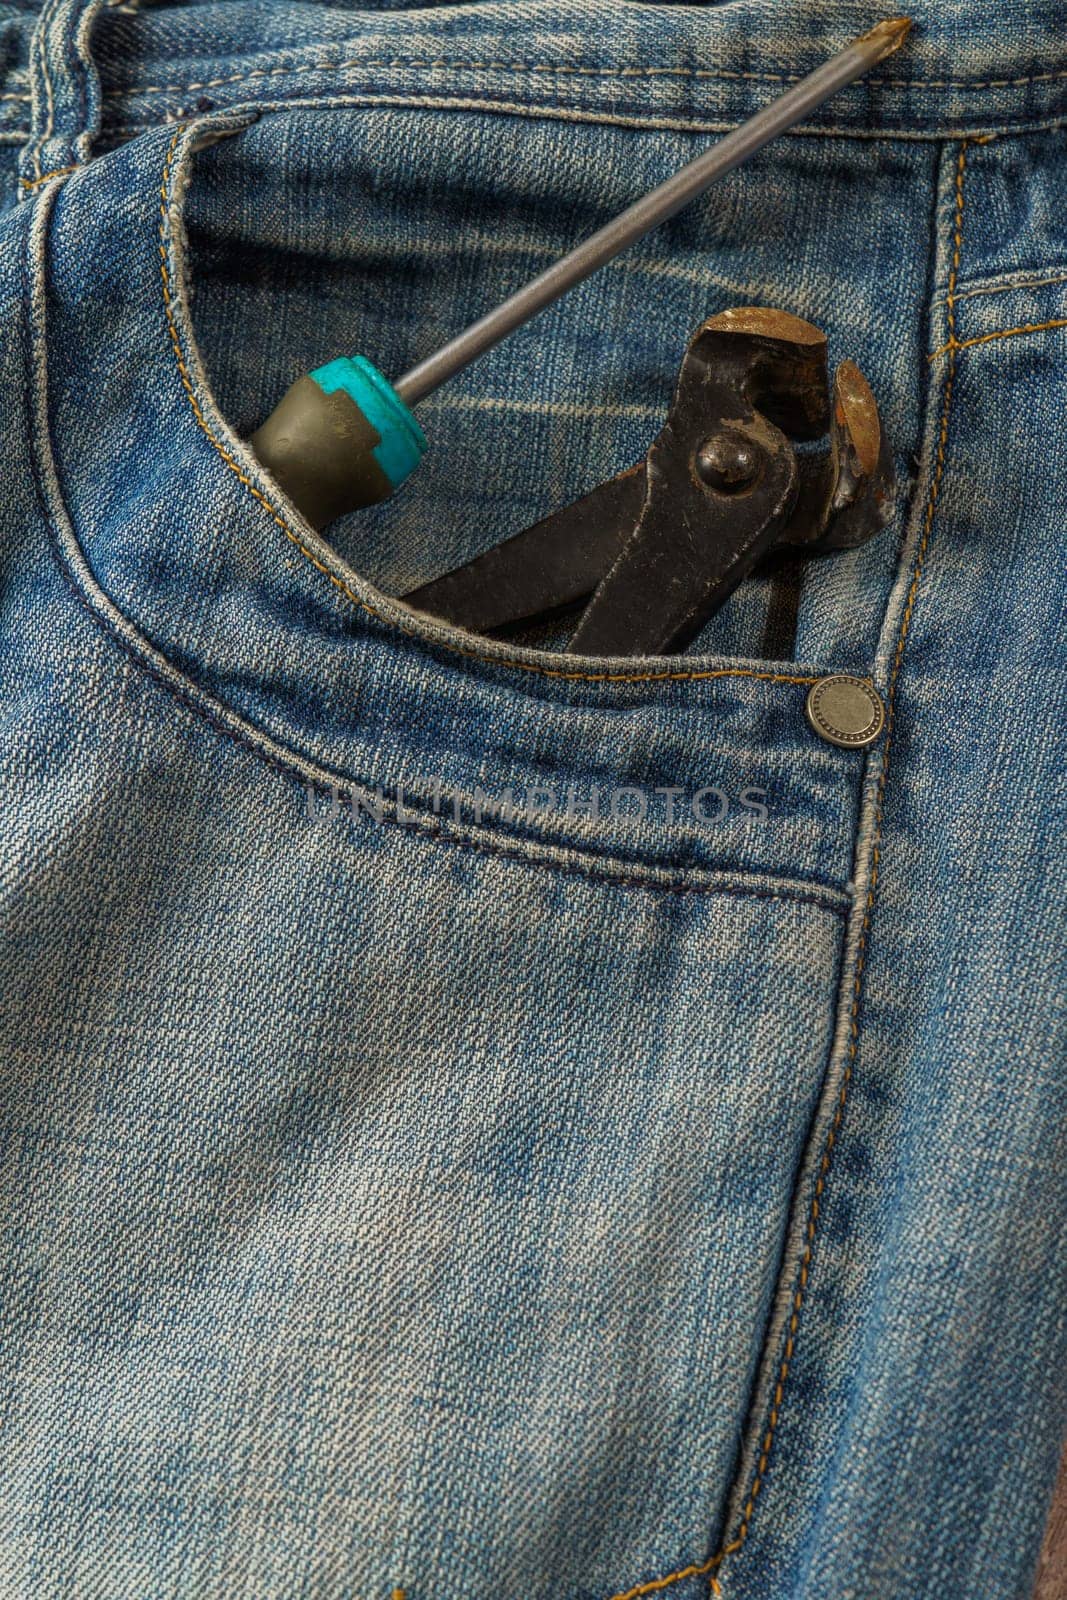 jeans with a screwdriver and pliers sticking out of the pocket